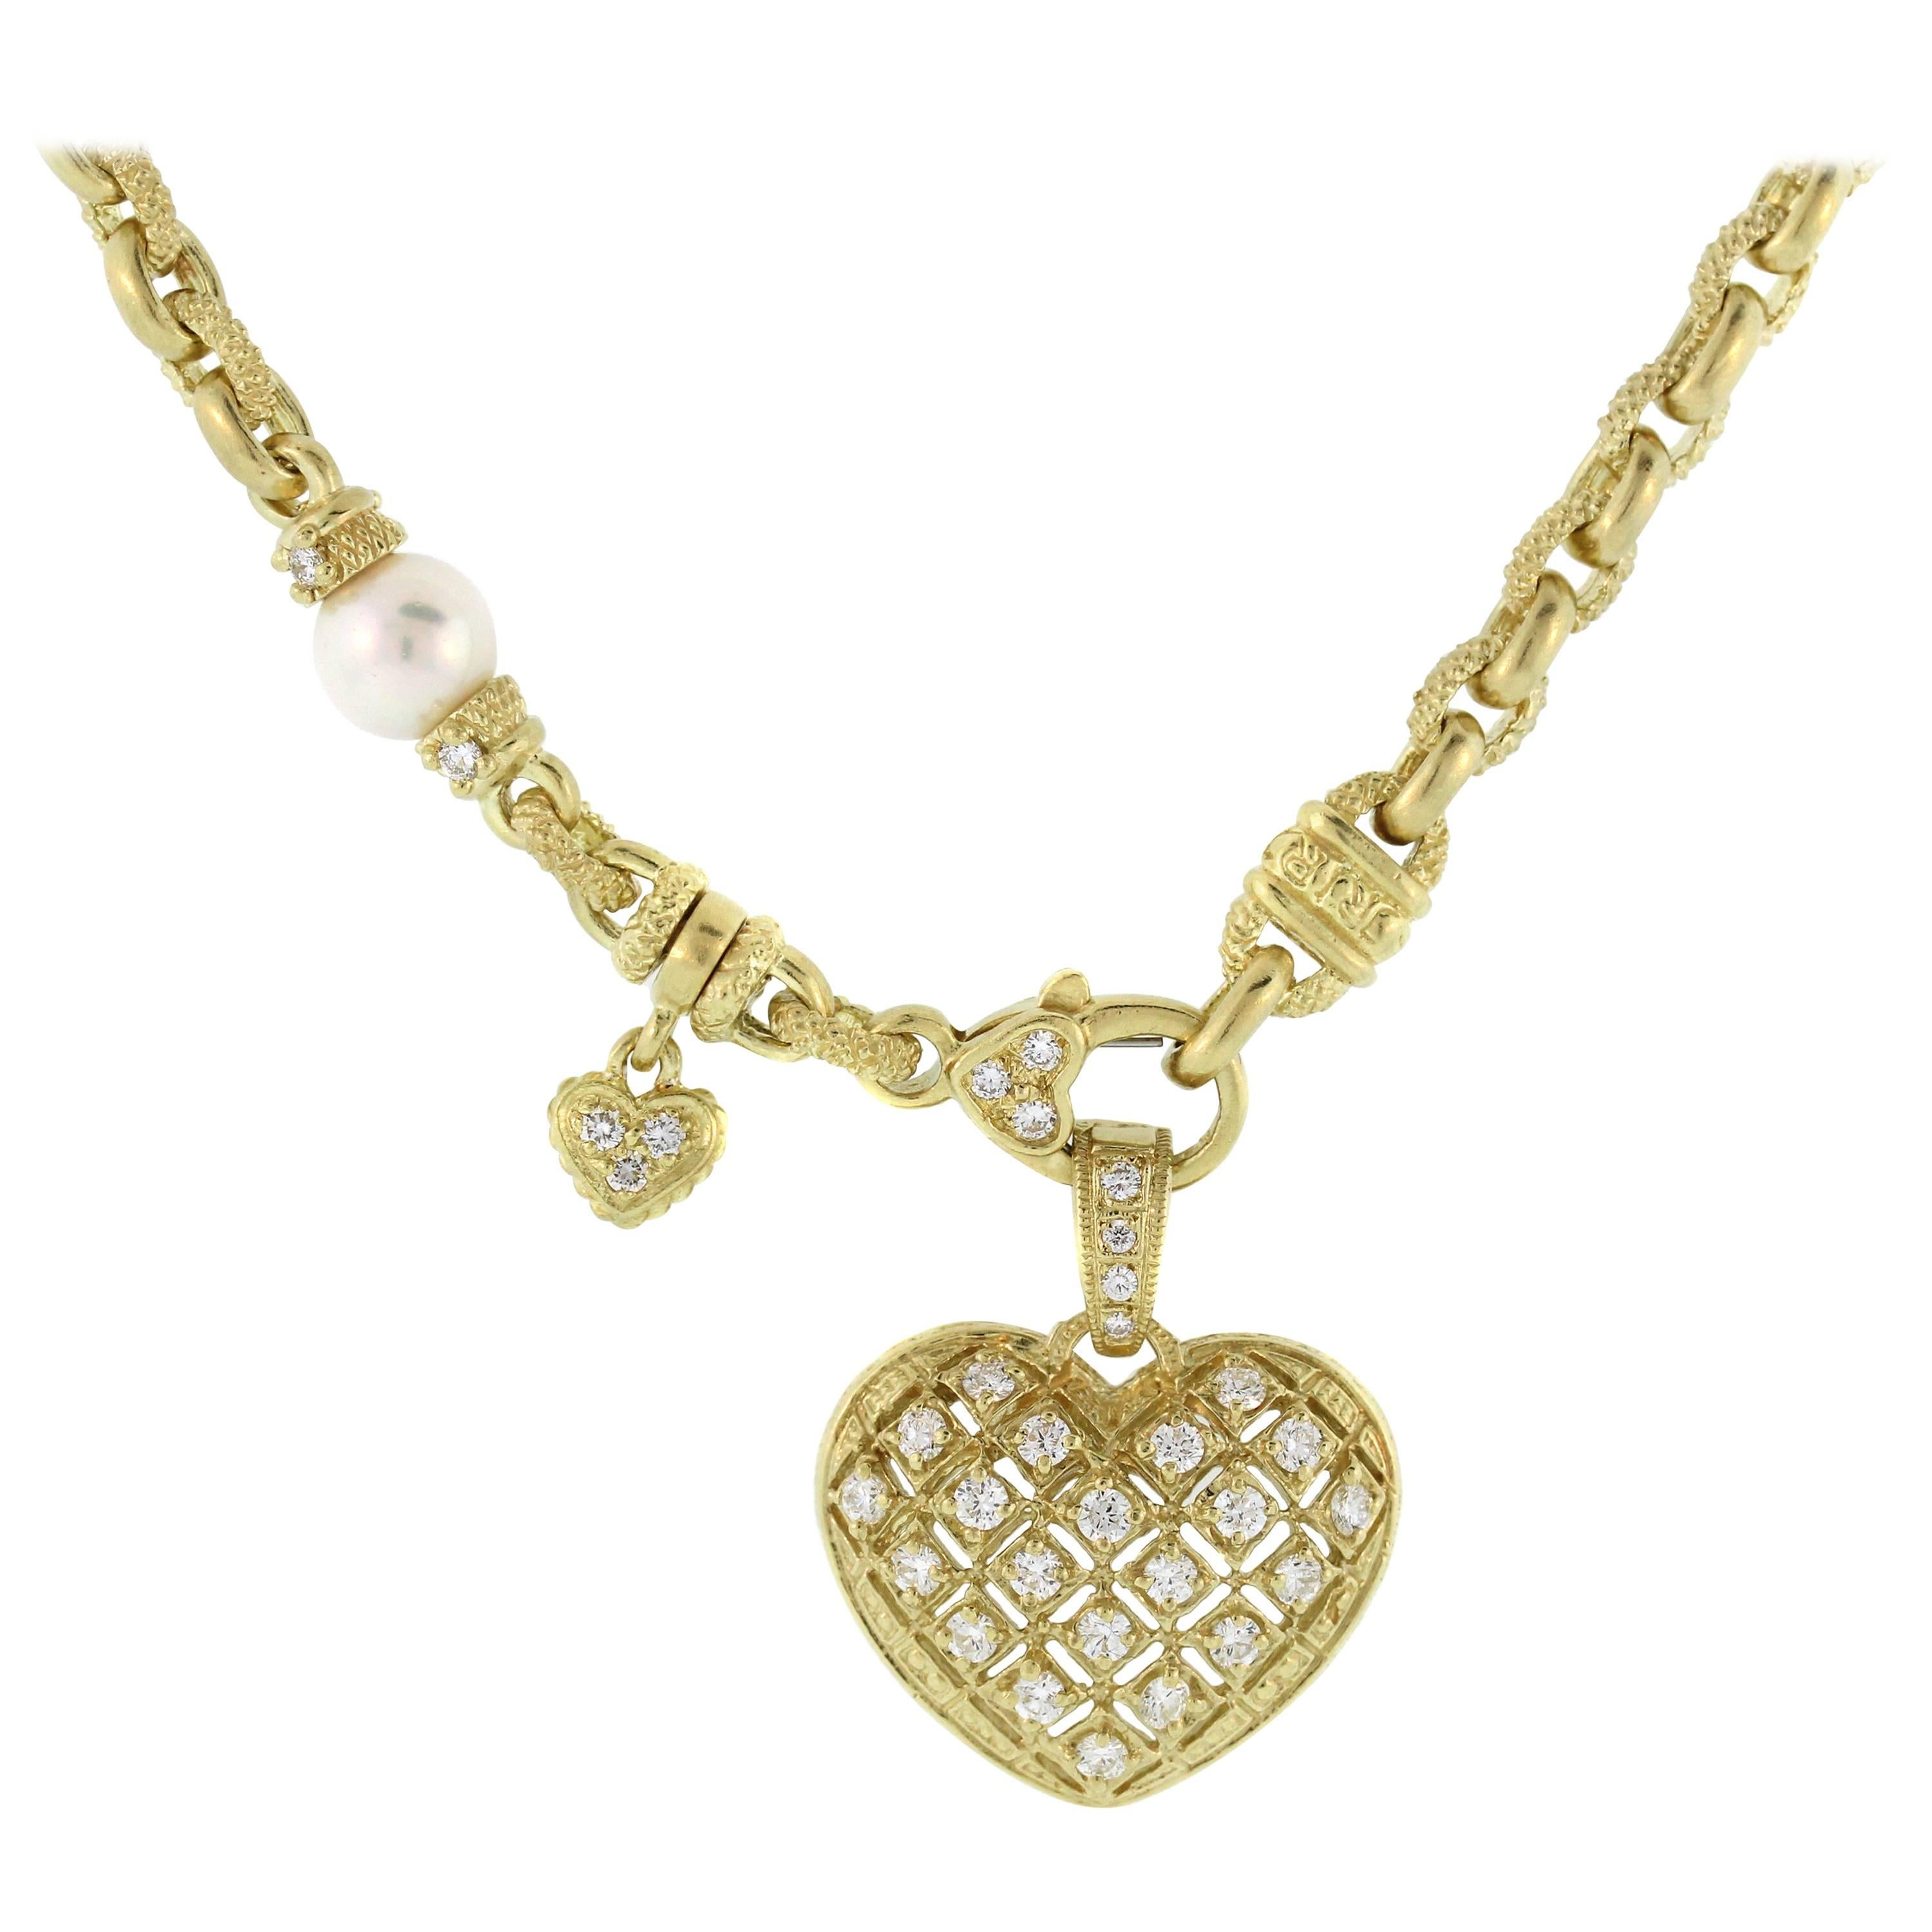 Judith Ripka Chain Necklace with Diamond and Gold Heart Enhancer